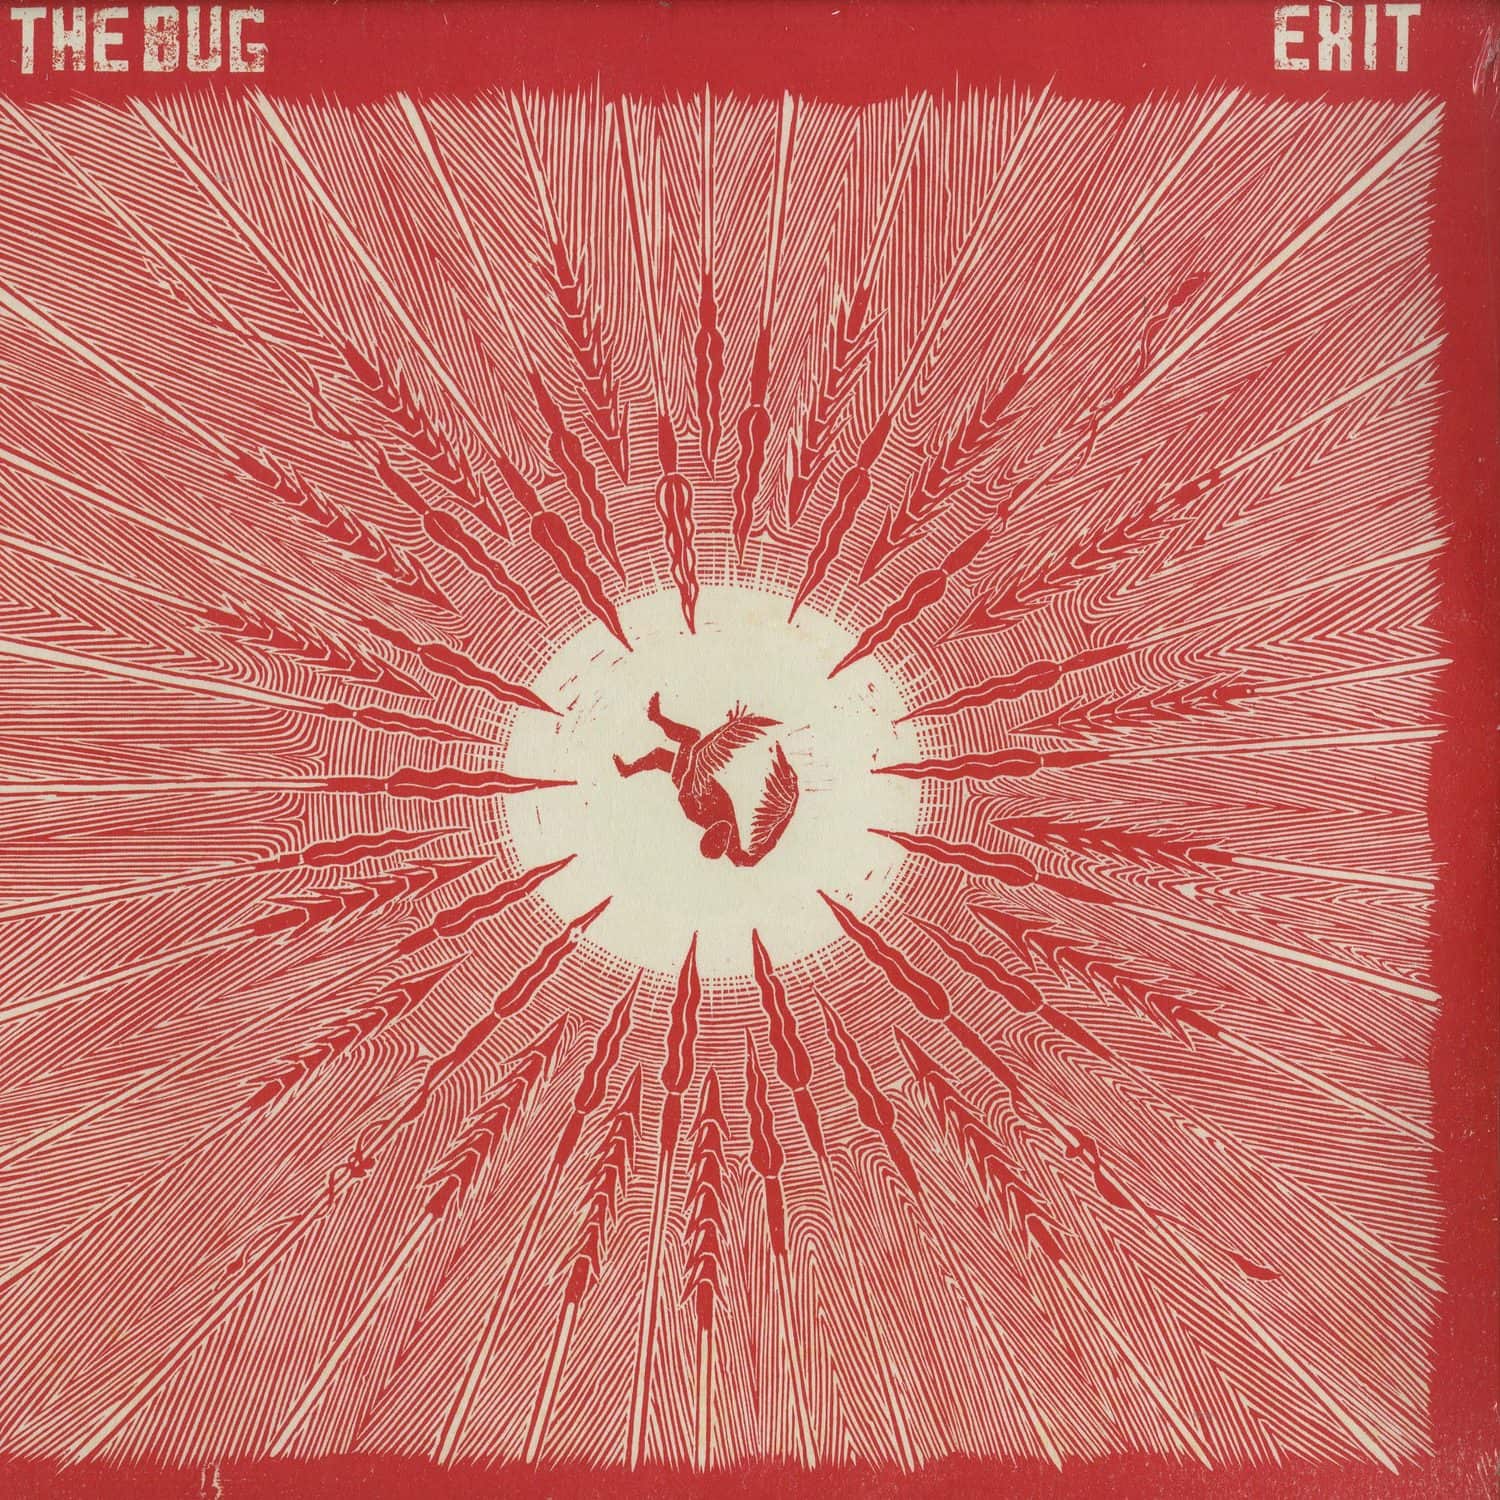 The Bug - EXIT 